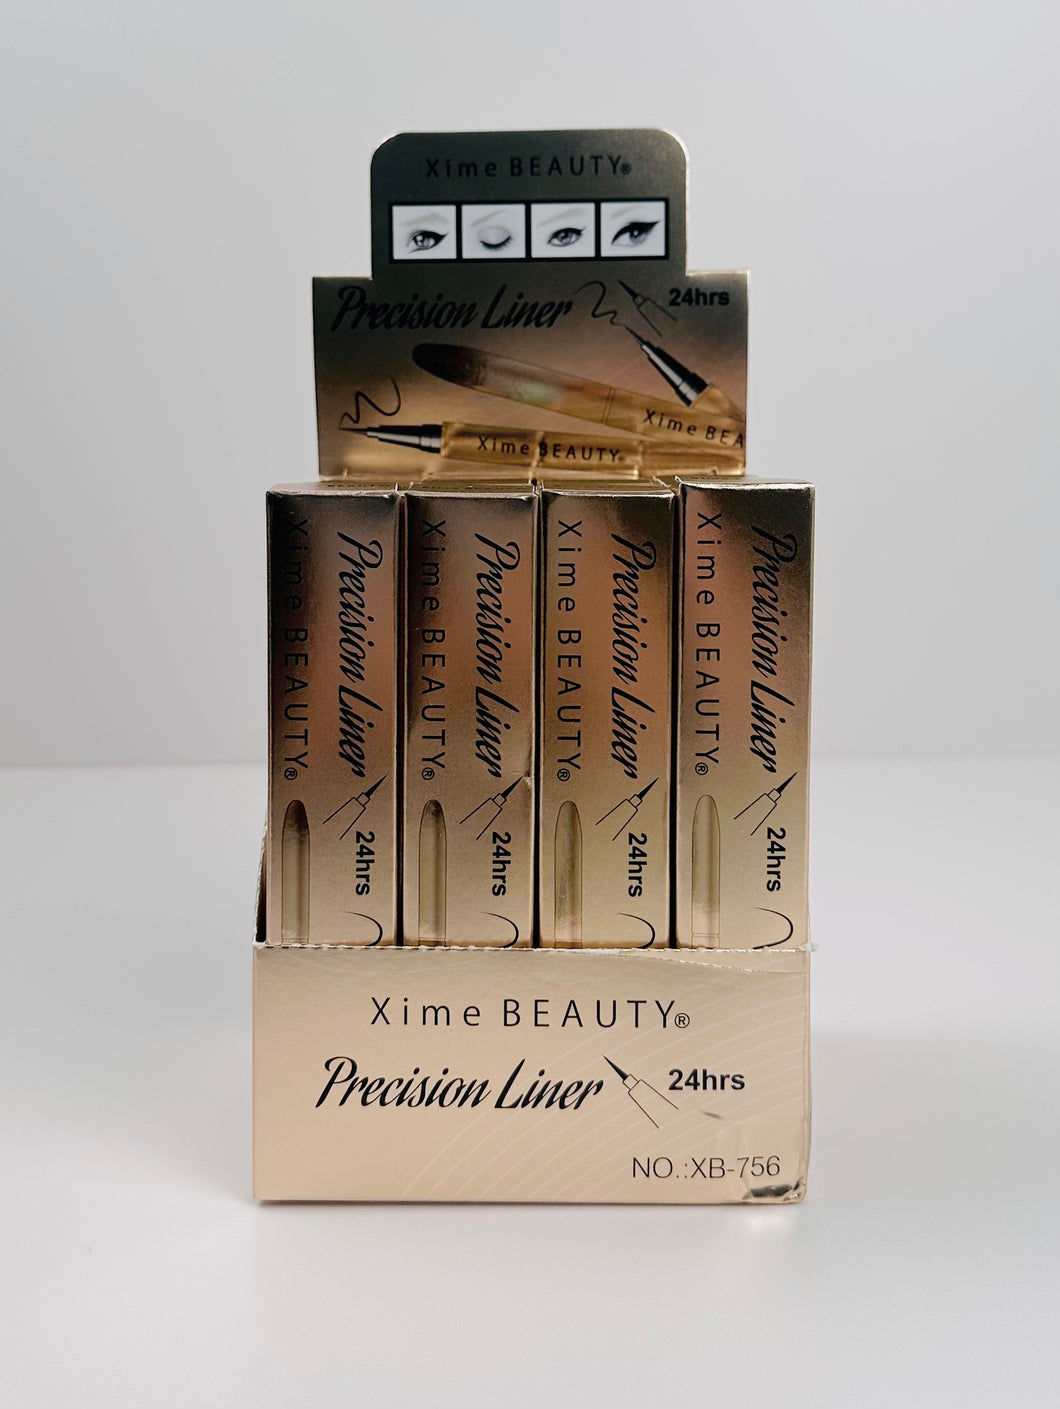 Xime Beauty Precision Liner Display